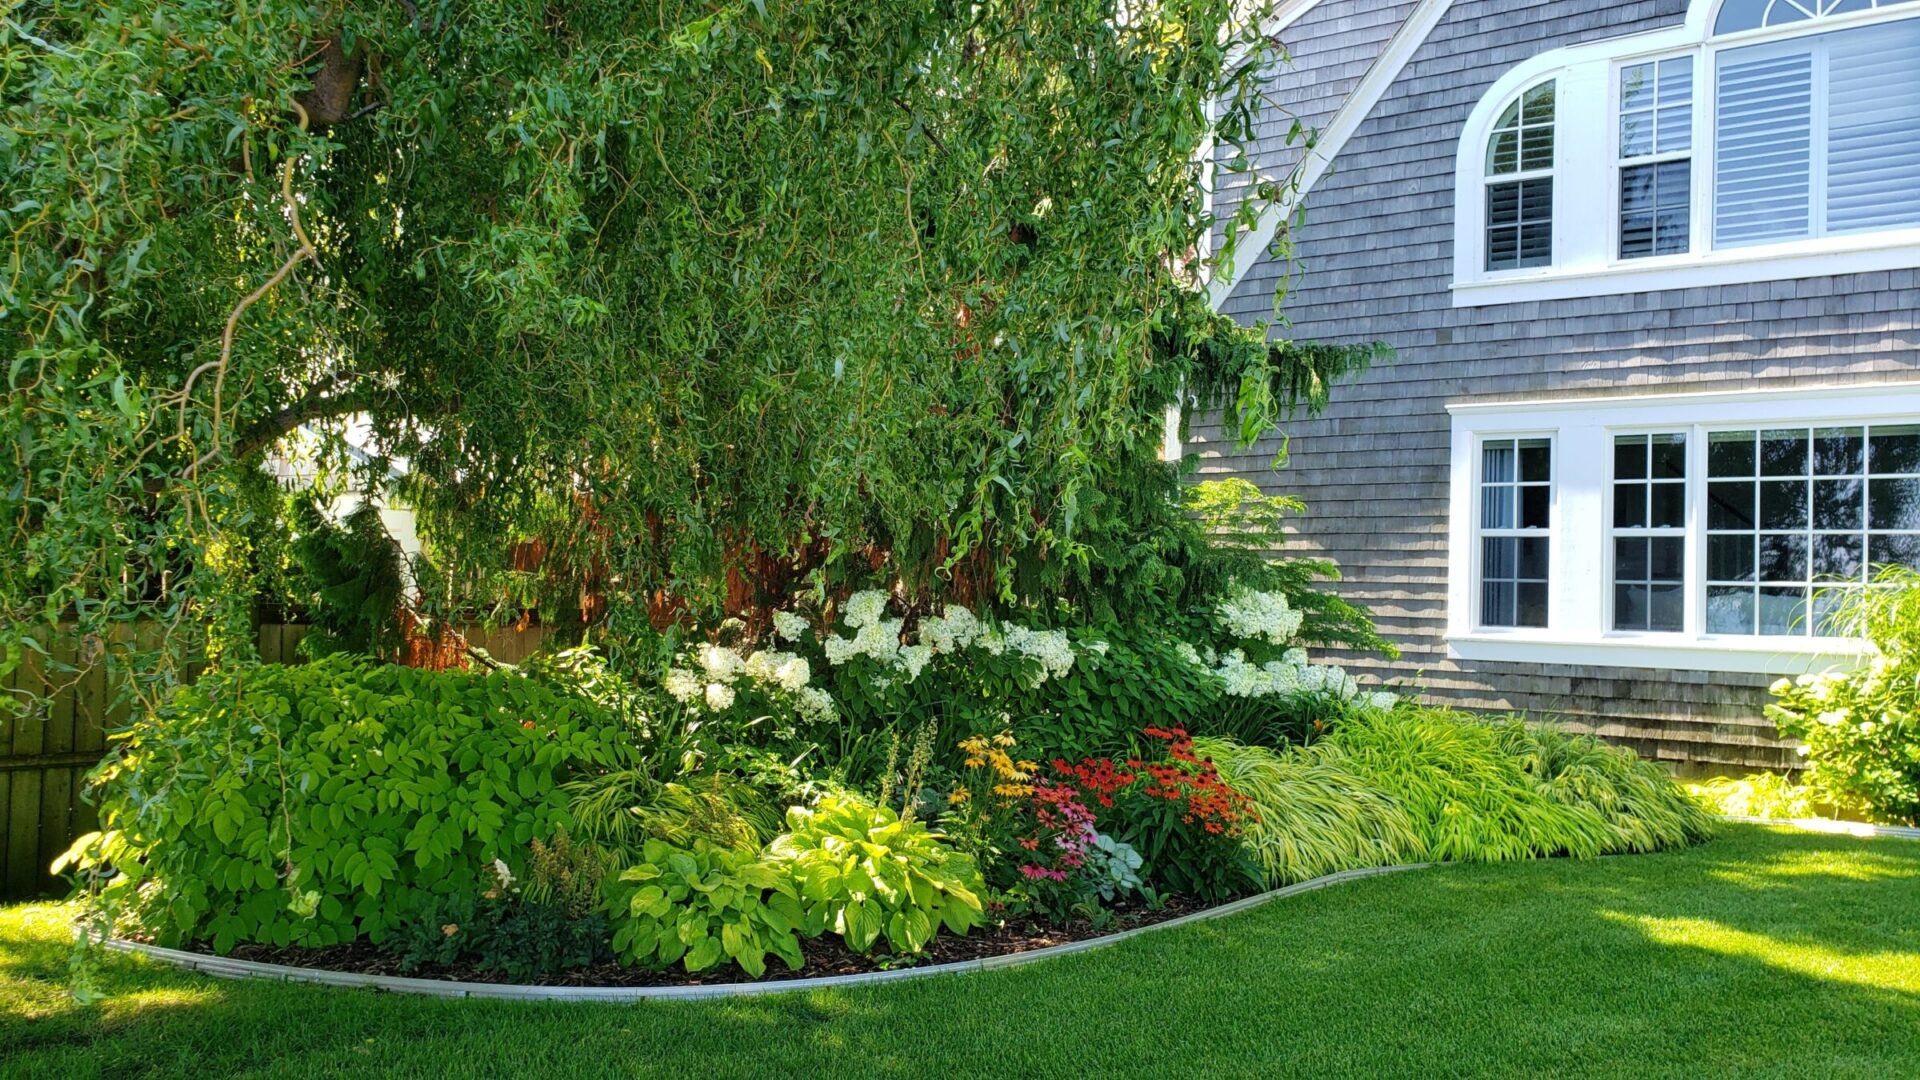 Lush garden with vibrant flowers next to a traditional house with white windows and gray shingles. The lawn is neatly trimmed and green.